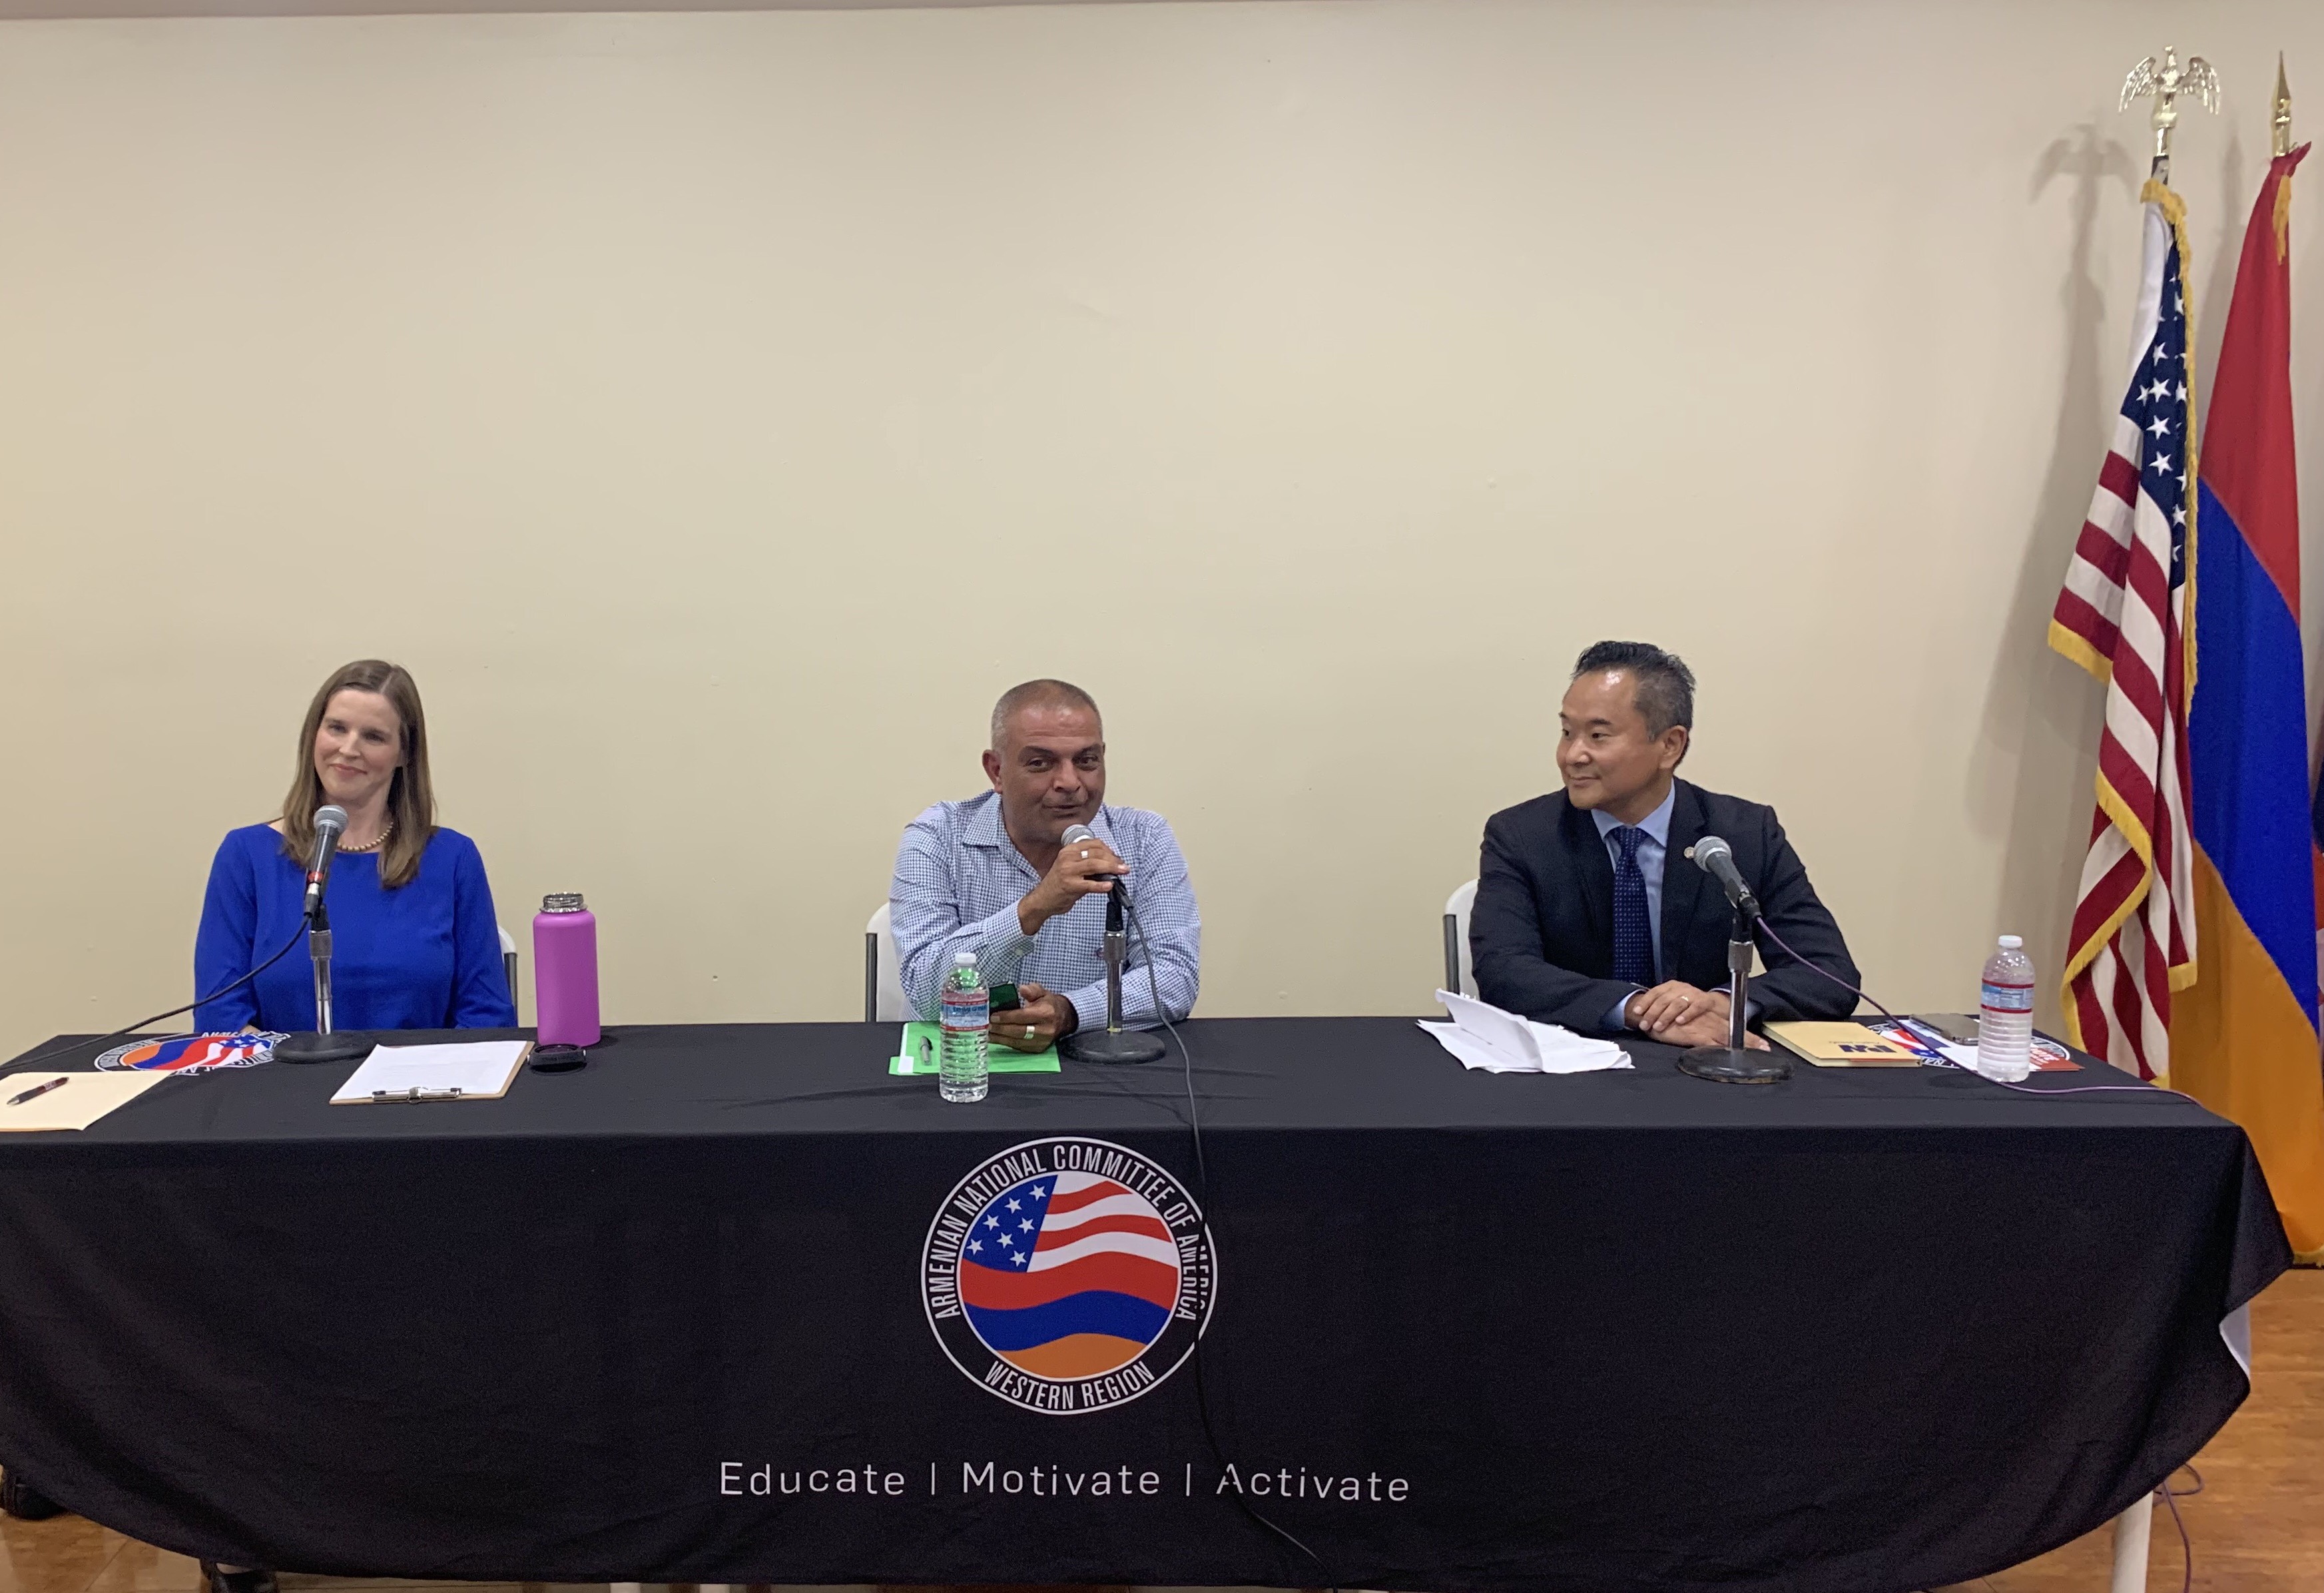 ANCA Organizes Candidate Forum for CD 12